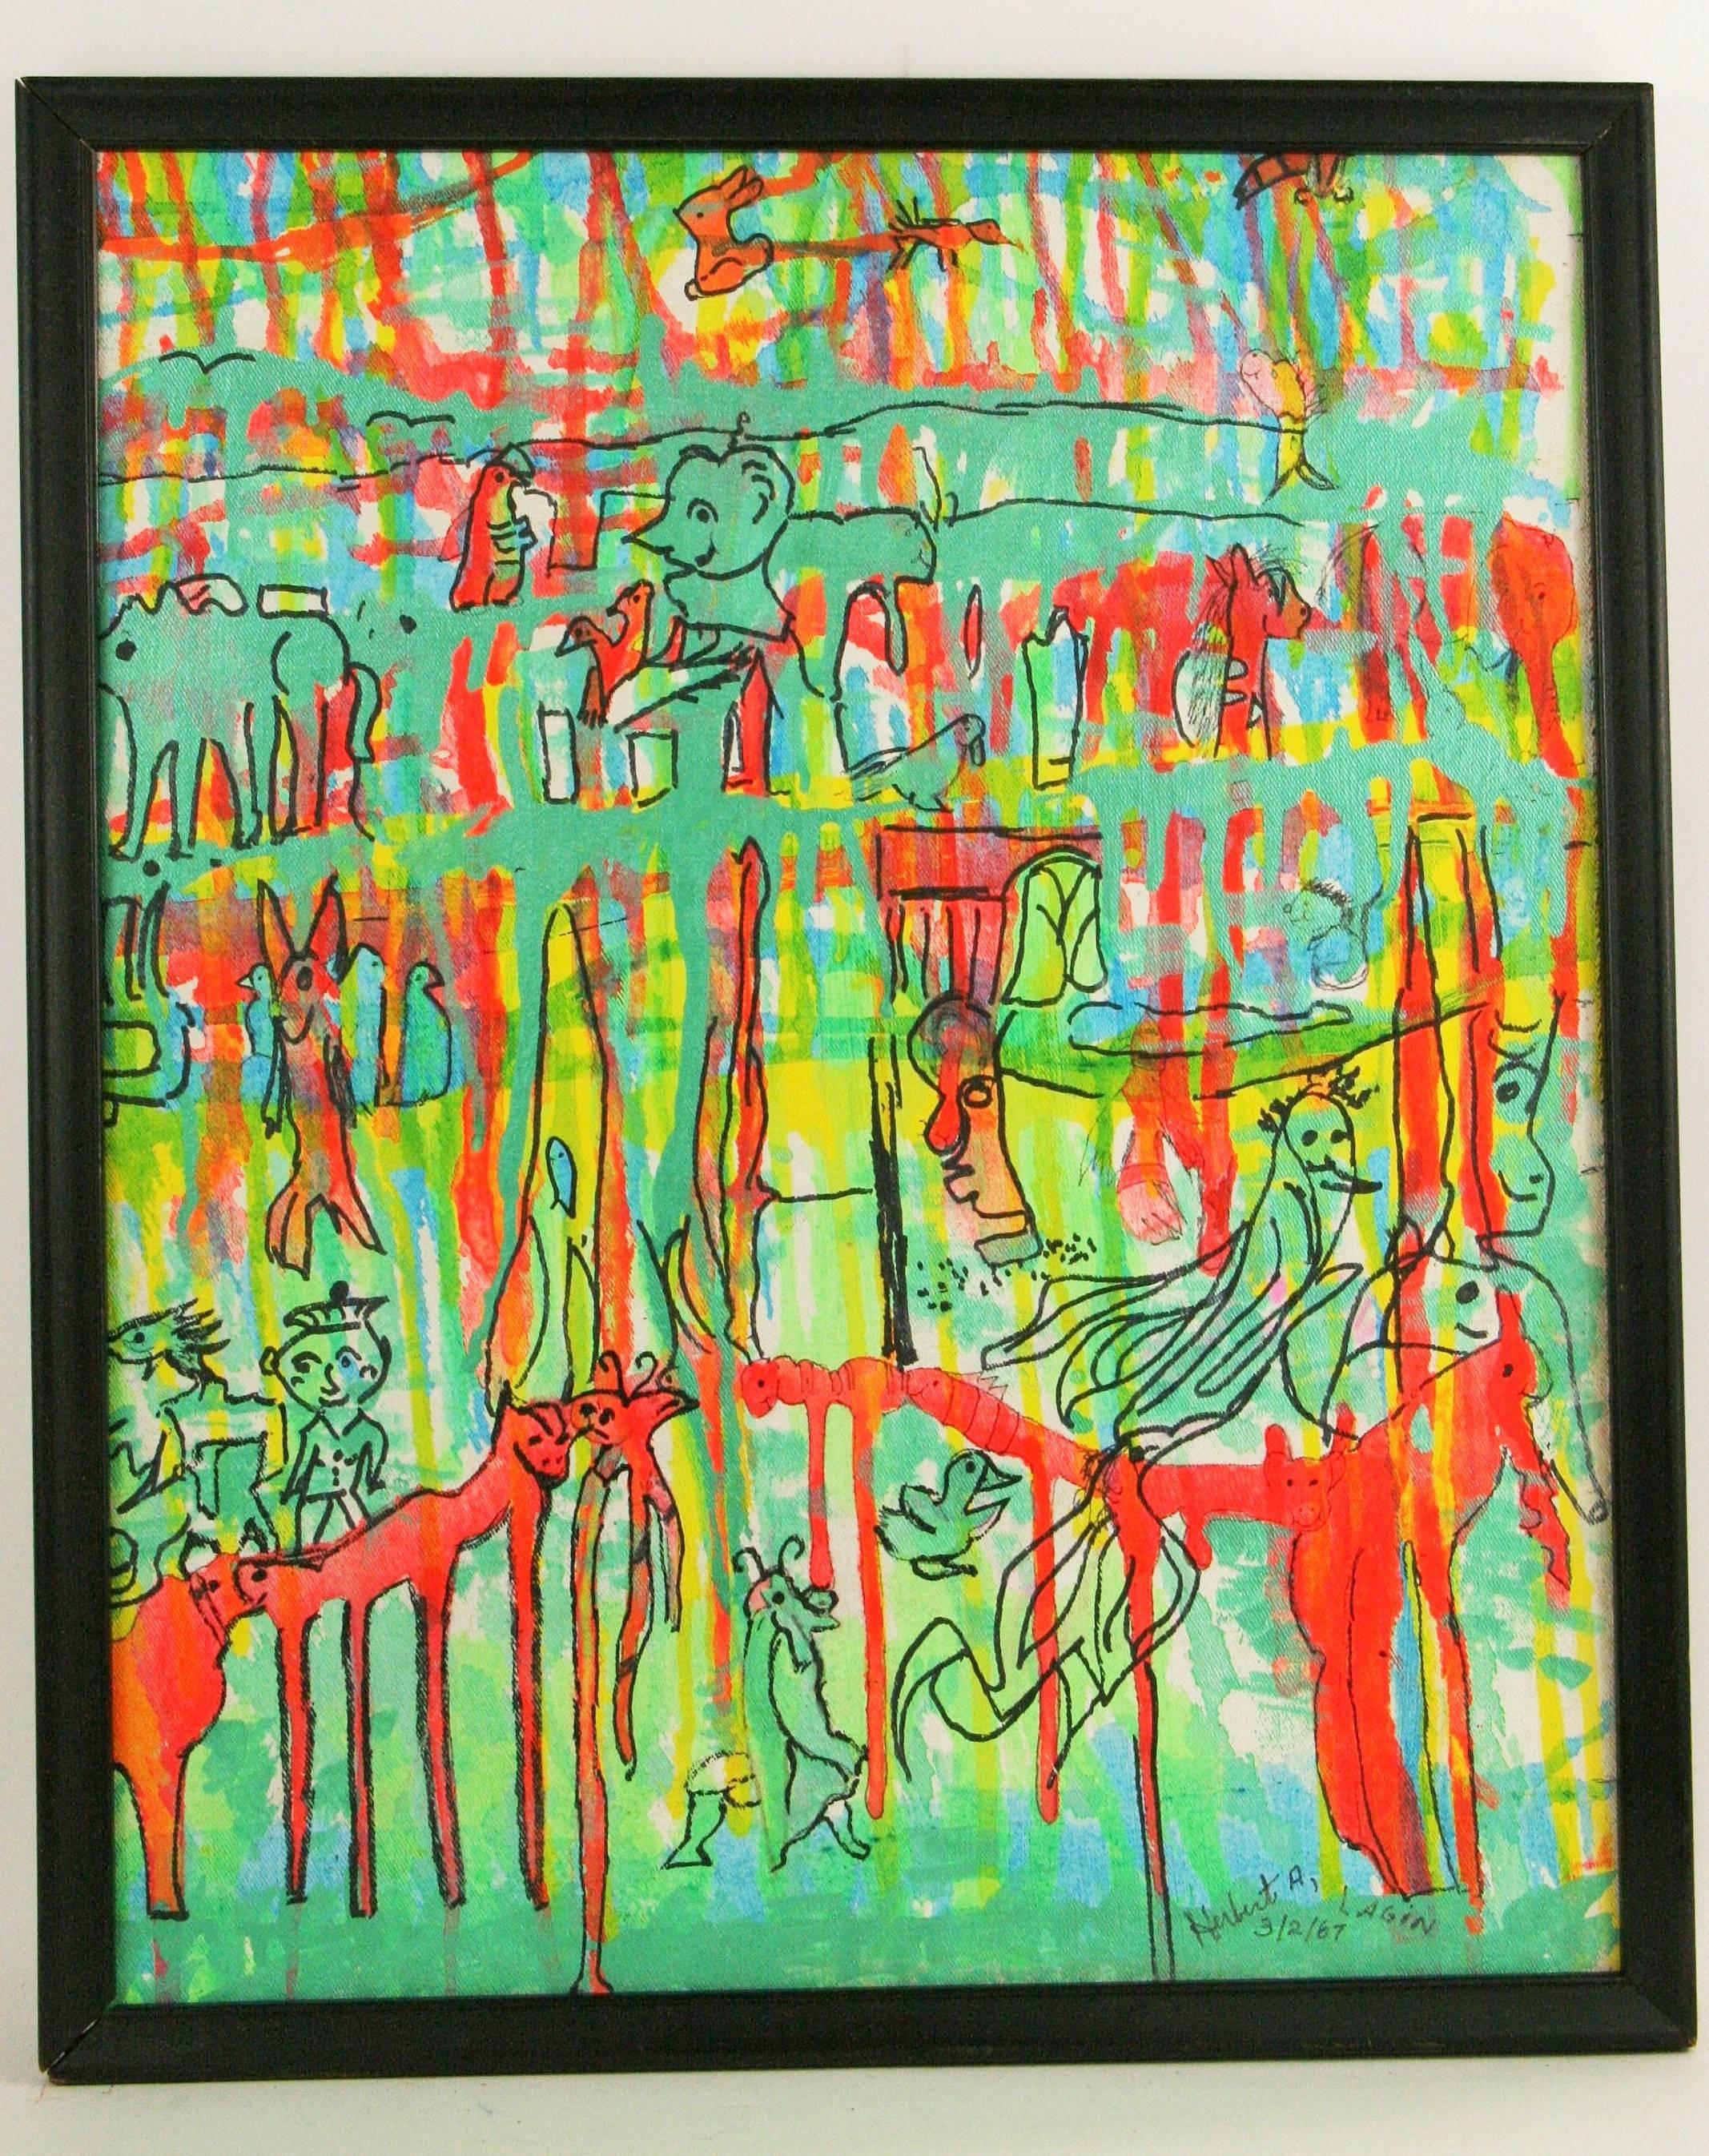 A.Langin Abstract Painting - Abstract Animals Landscape on the Savana Painting by Langin